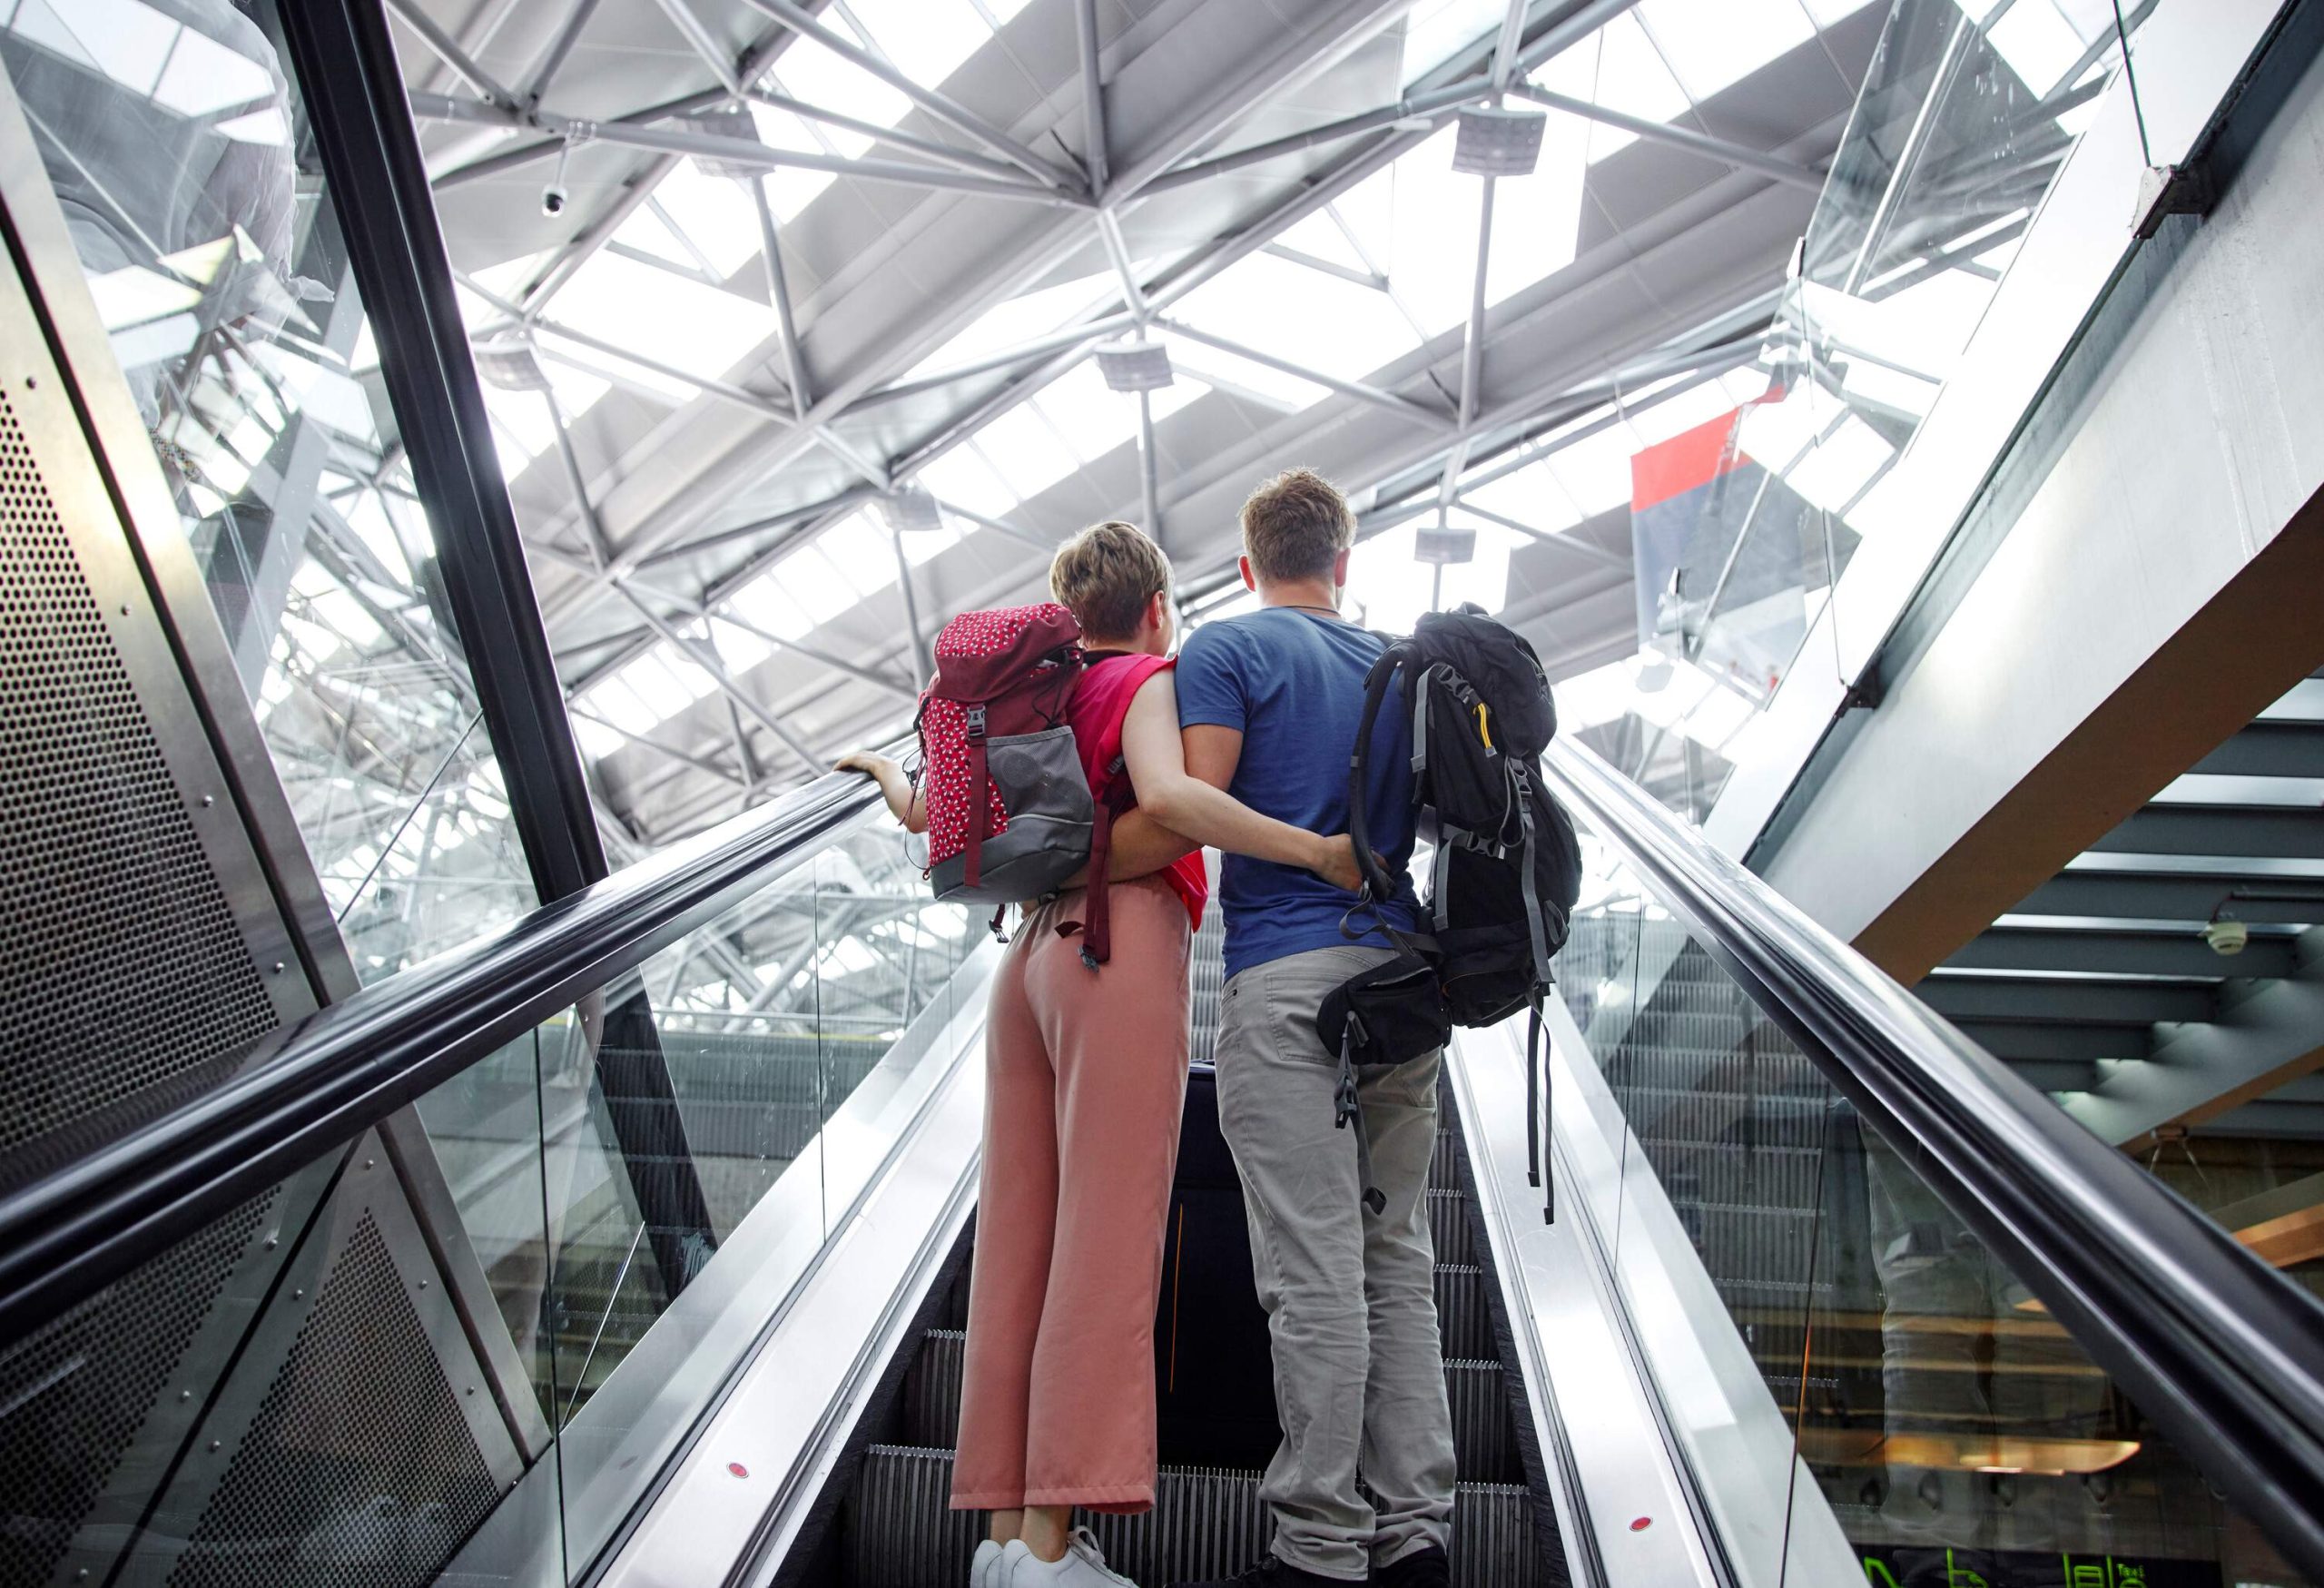 A couple with backpacks riding the escalator to the upper level of the terminal.